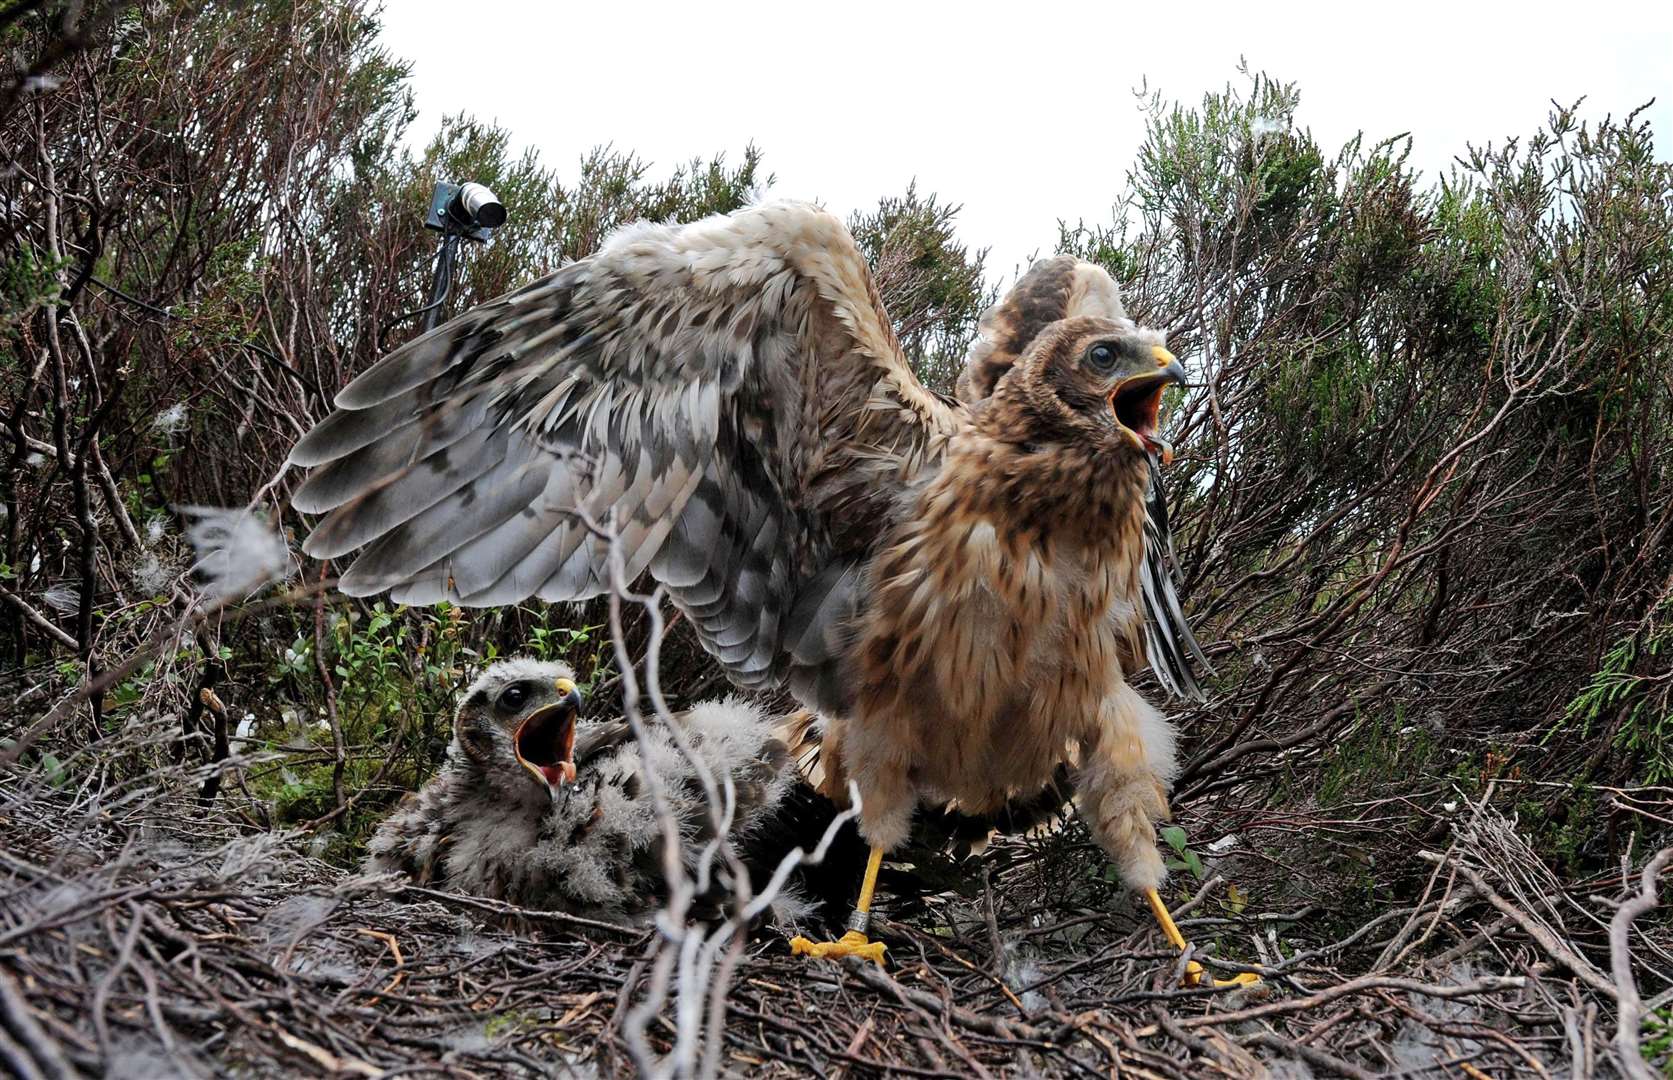 In one incident, hen harrier chicks were trampled to death in their nest, the RSPB said (Owen Humphreys/PA)